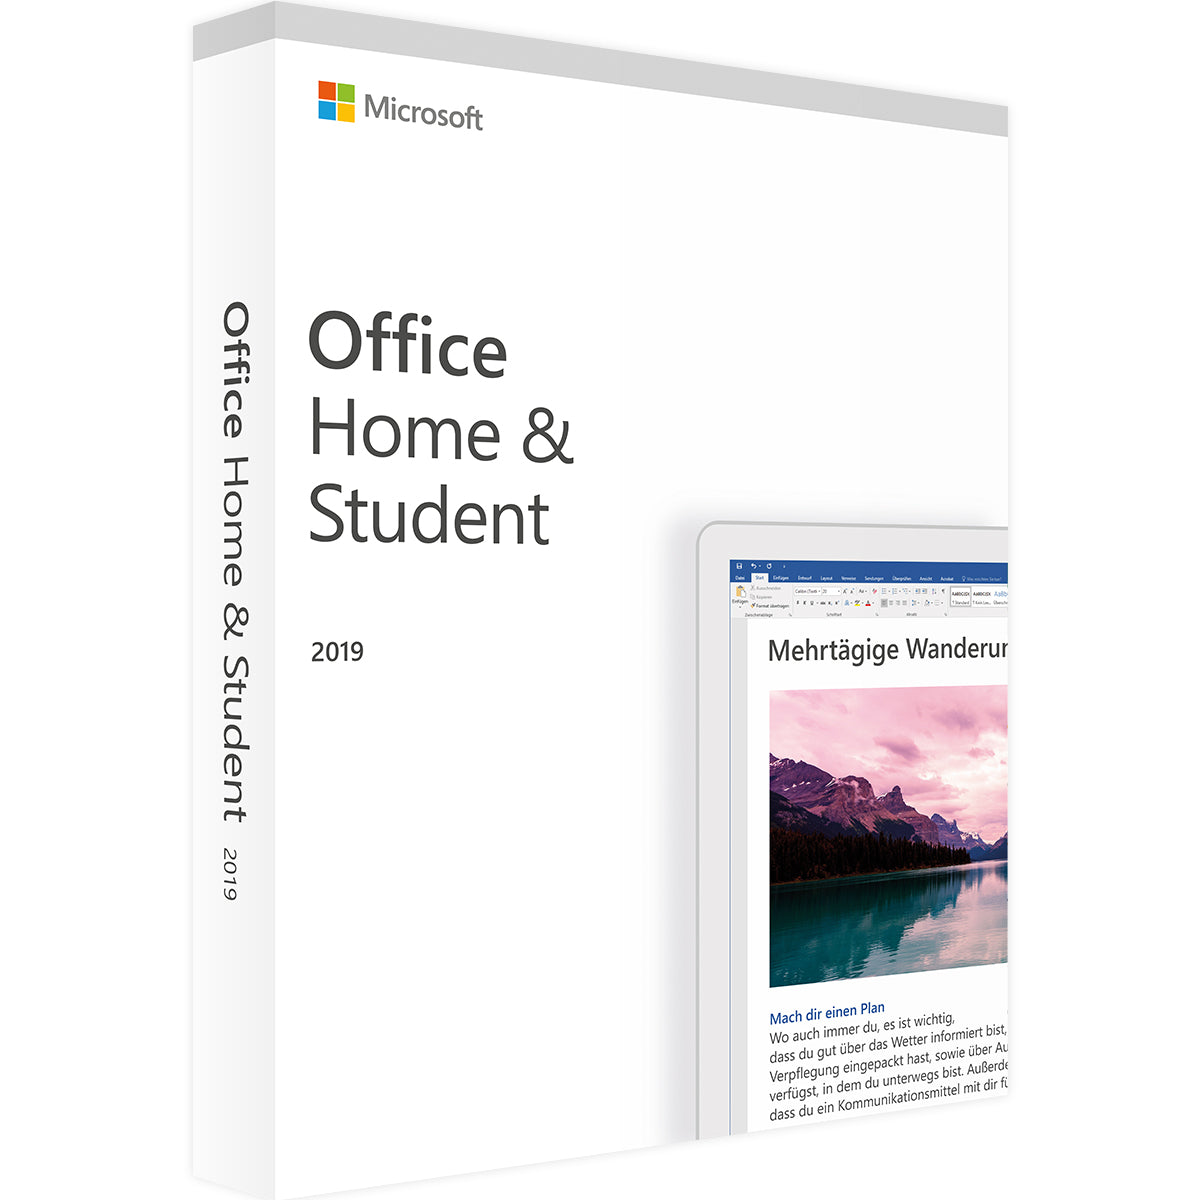 microsoft access for mac students